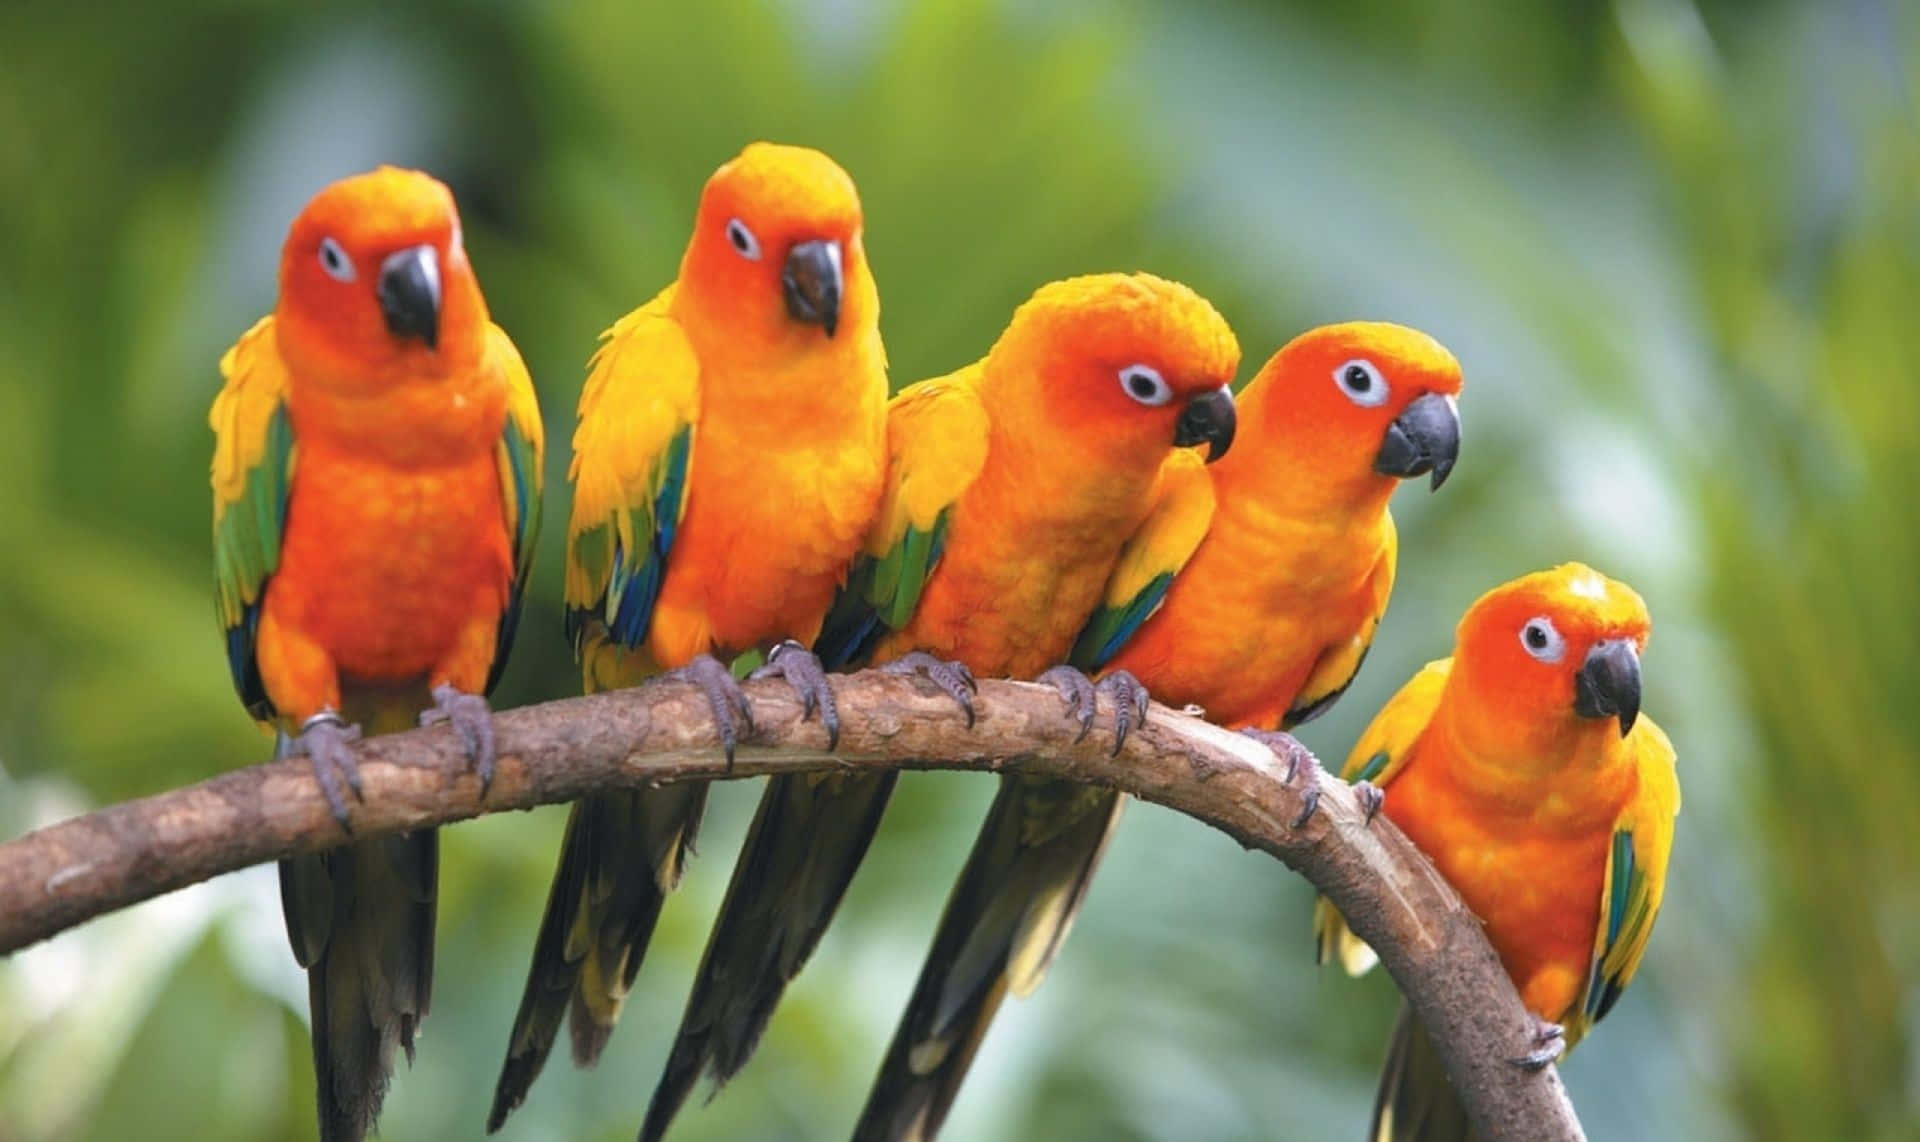 Enjoy nature's beauty with a cheerful parrot